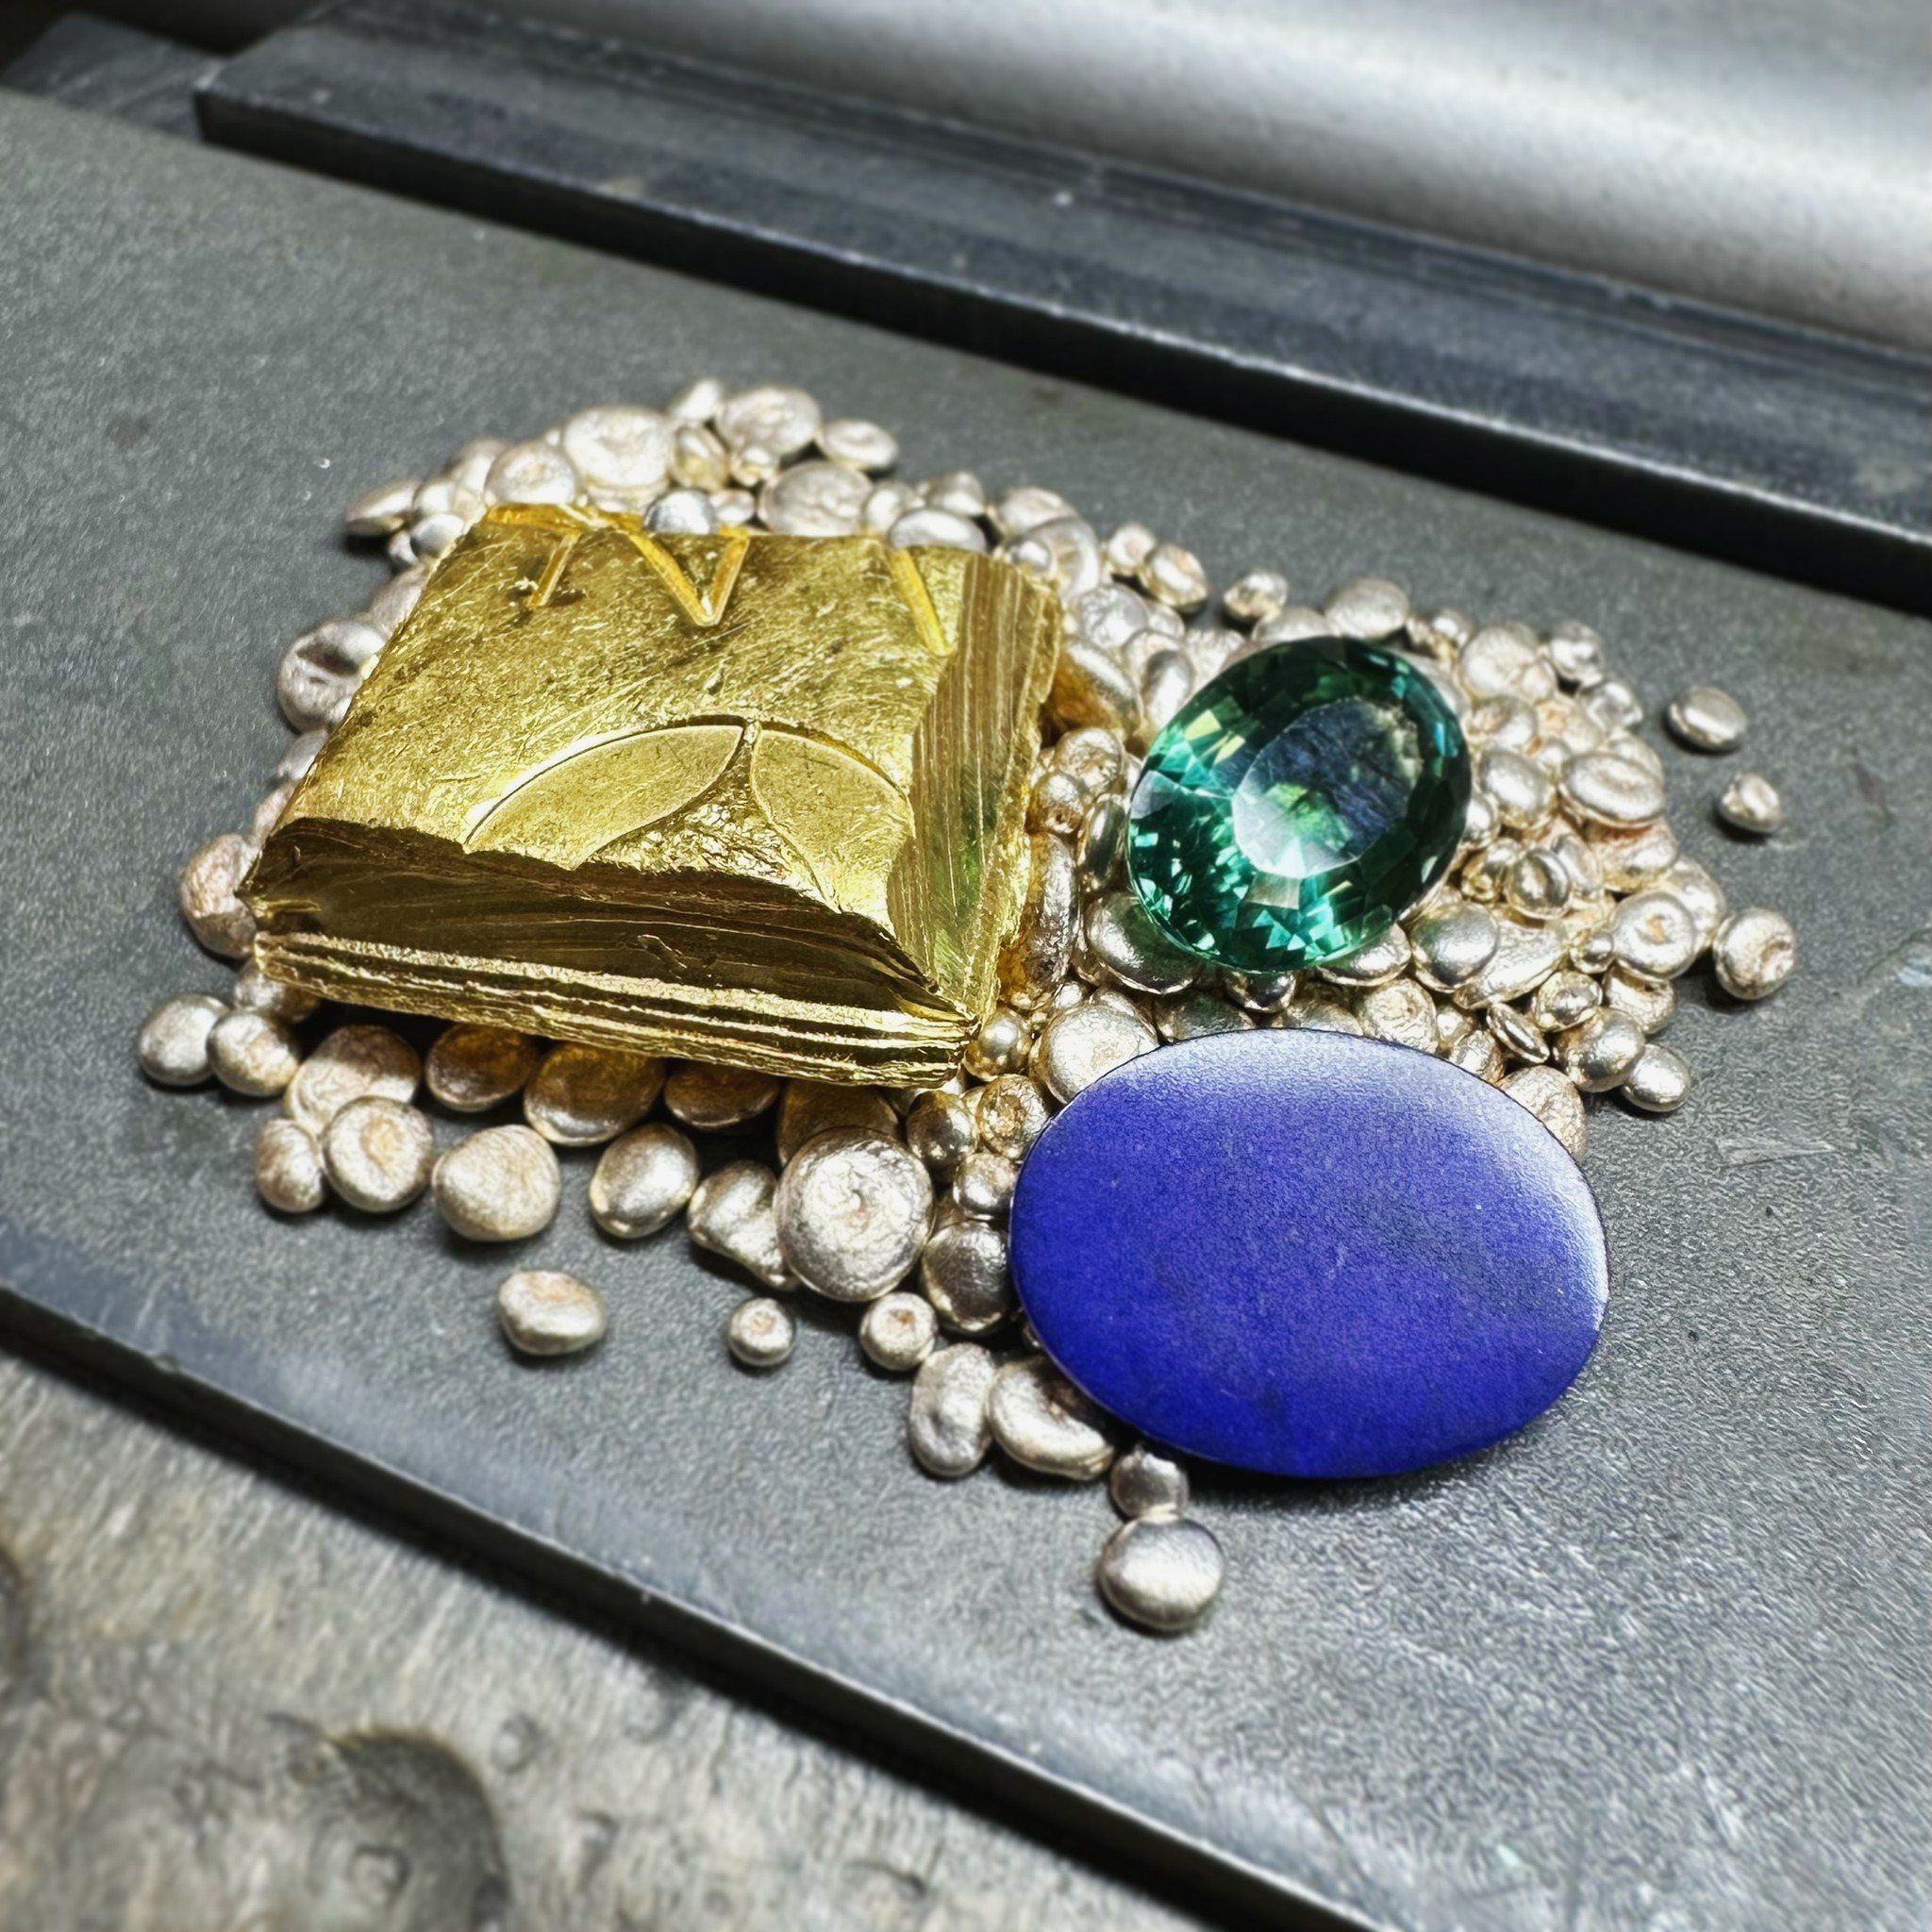 ~ The Beginning ~

The beginning of another custom jewelry piece! This is going to be a nice chunky juicy gold ring, set with my client&rsquo;s stones out of some family heirloom pieces. Can&rsquo;t wait to see this one come together!

Come back soon